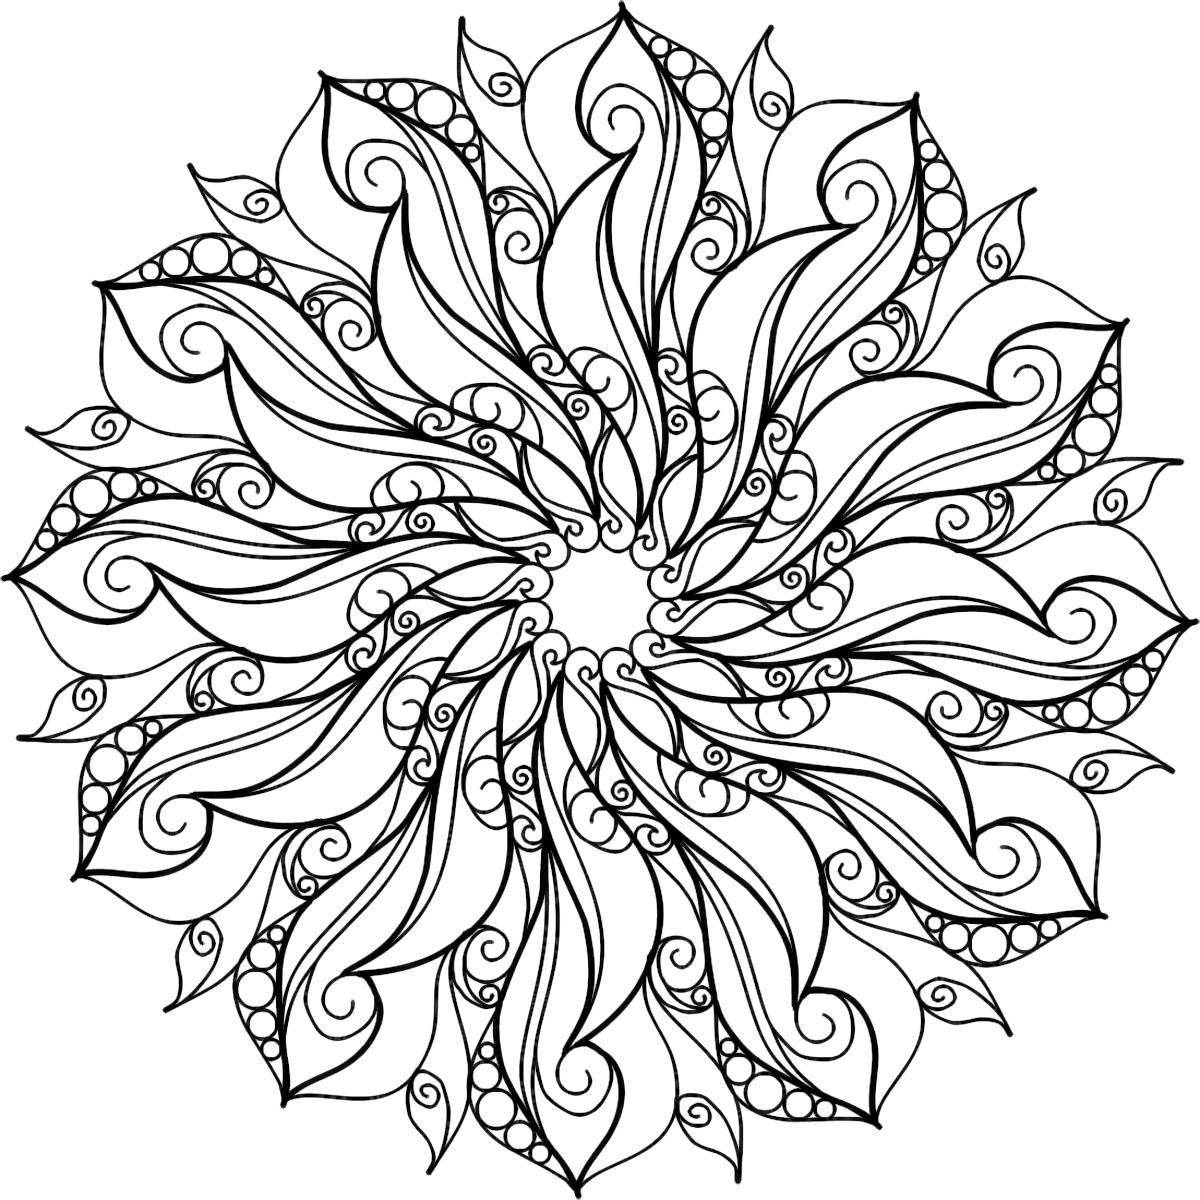 Adorable Mandala Antistress Coloring Pages for Adults en